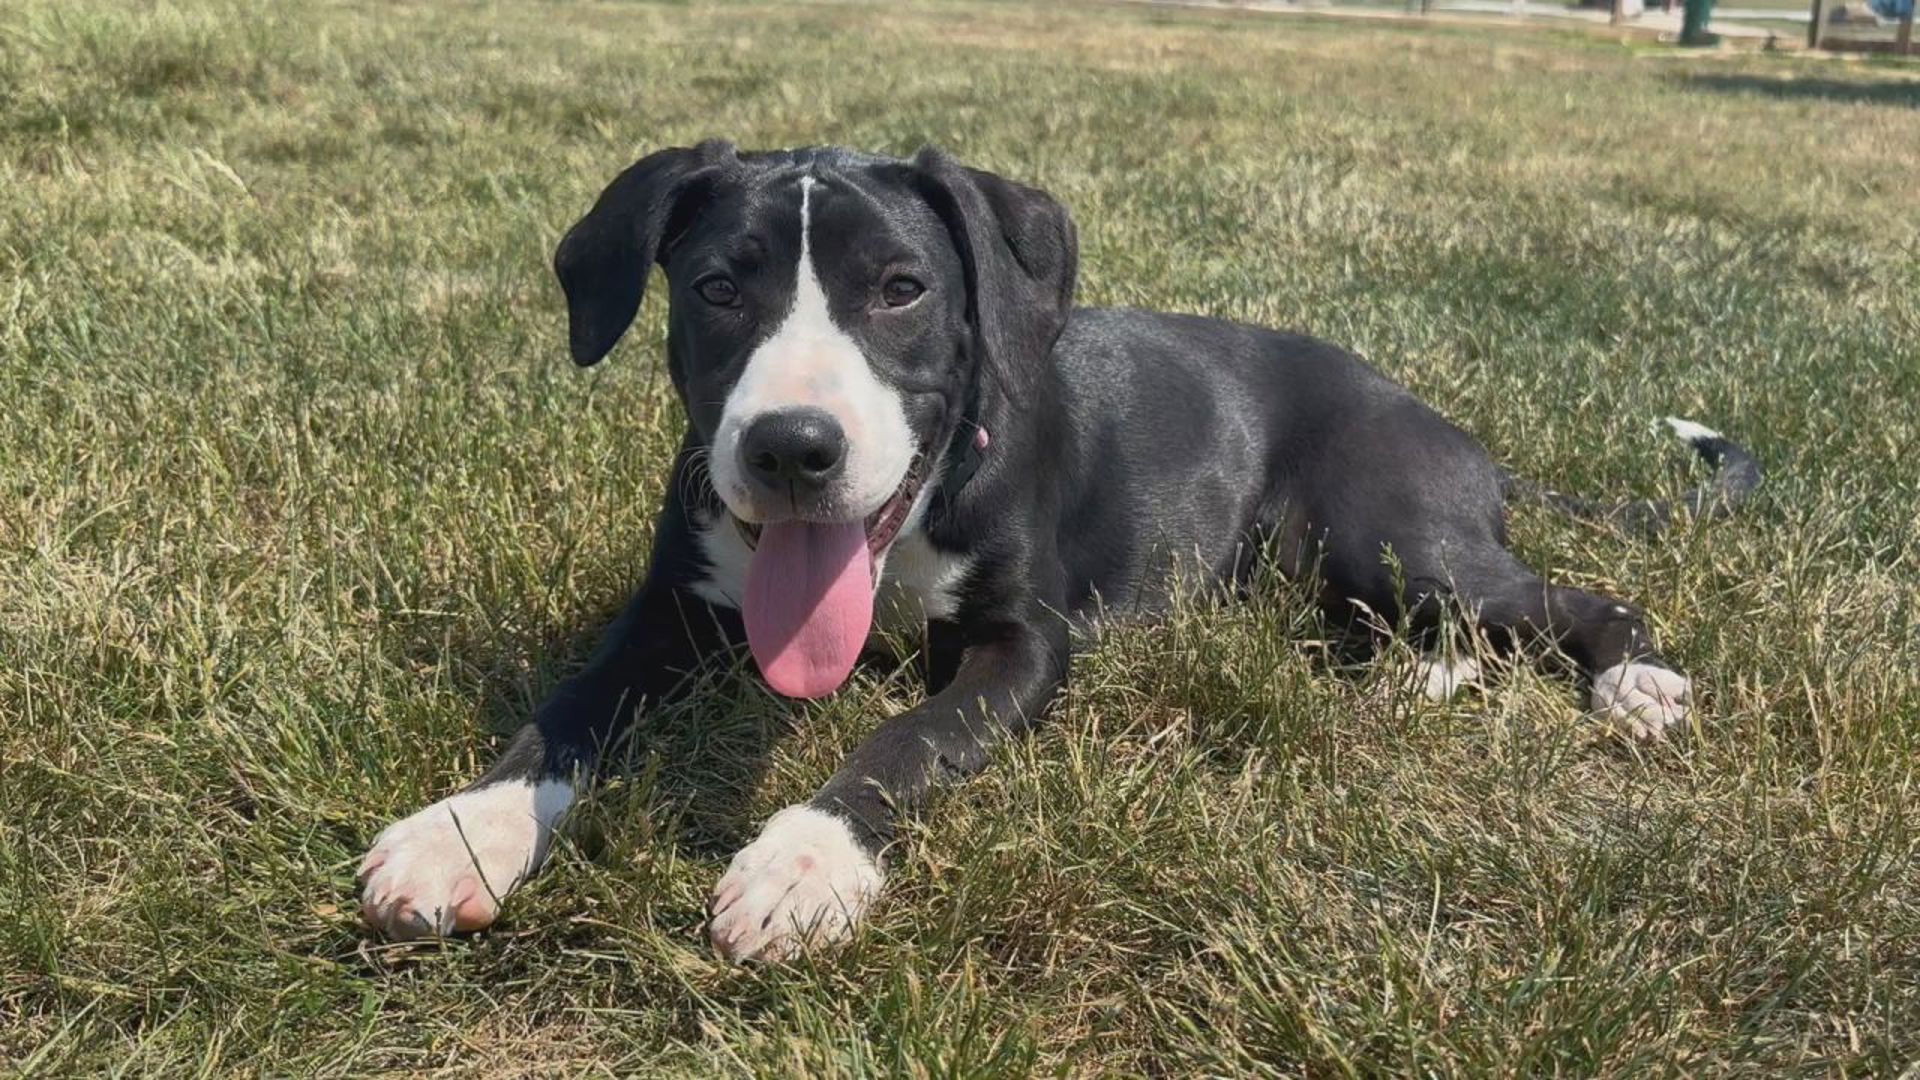 Anna is a 5-month-old puppy available for adoption at Charlie's Crusaders Pet Rescue. Her foster family says she's a chill, friendly dog who gets along with everyone